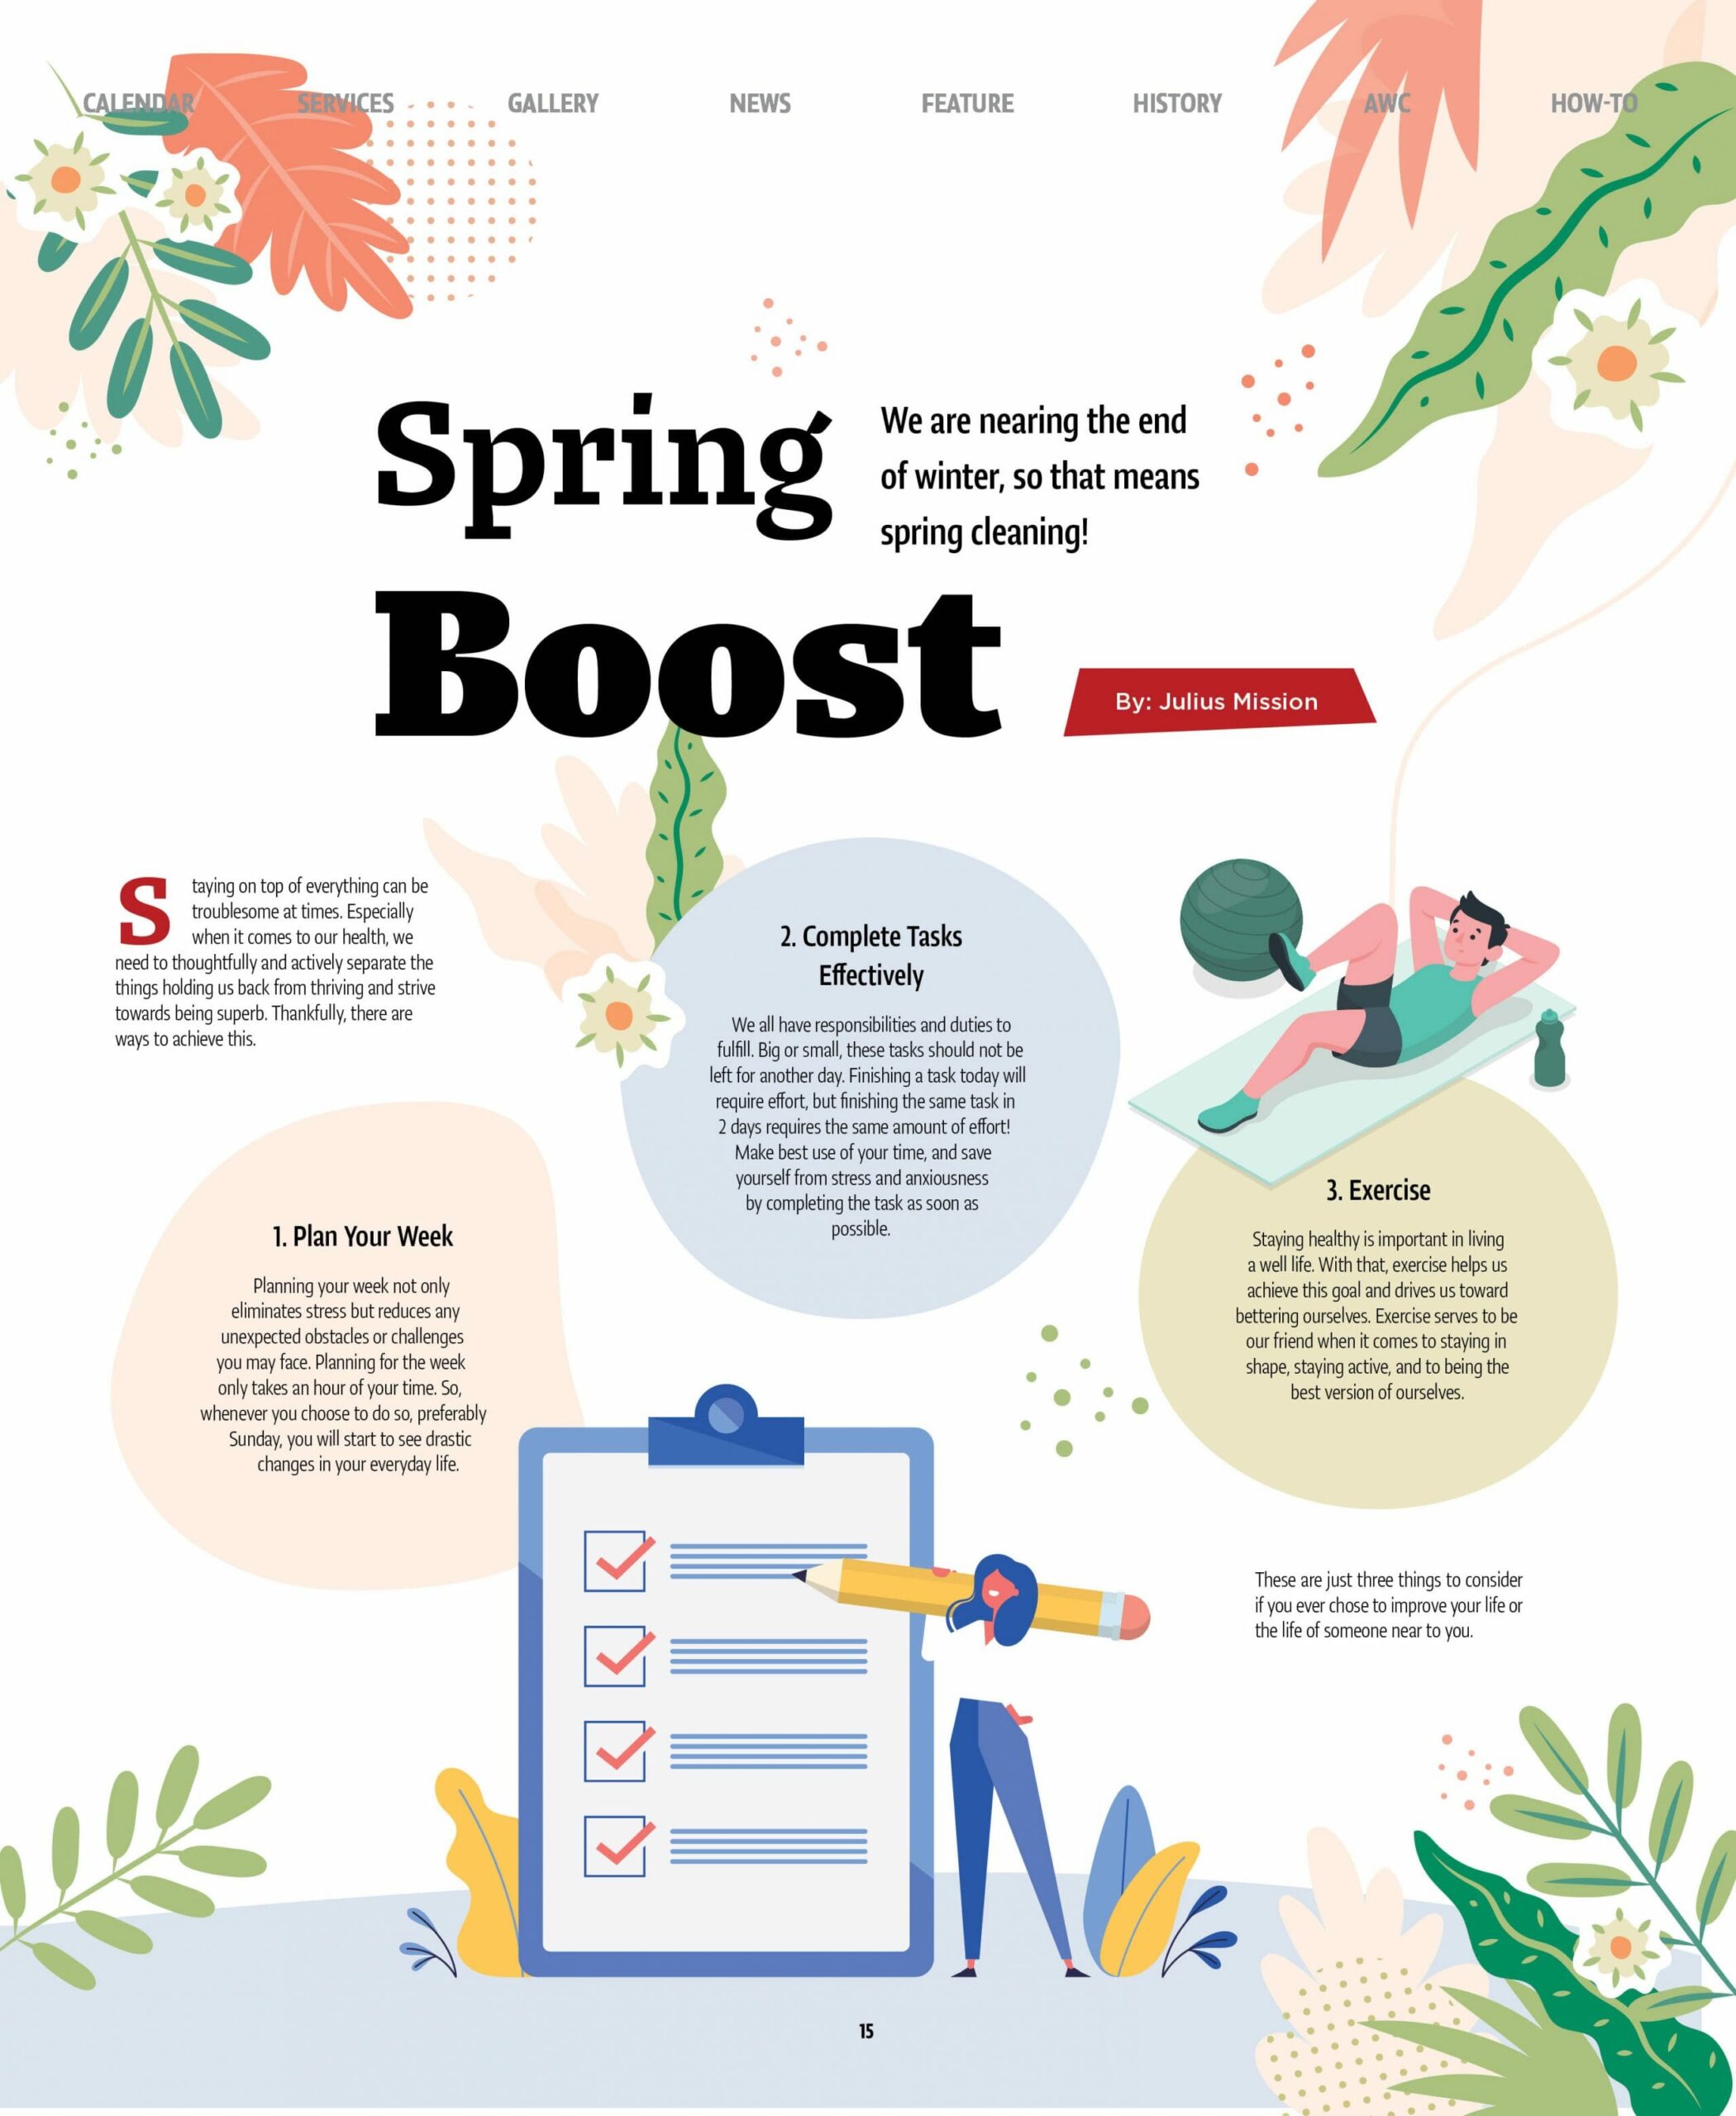 Steps to get a spring boost. 